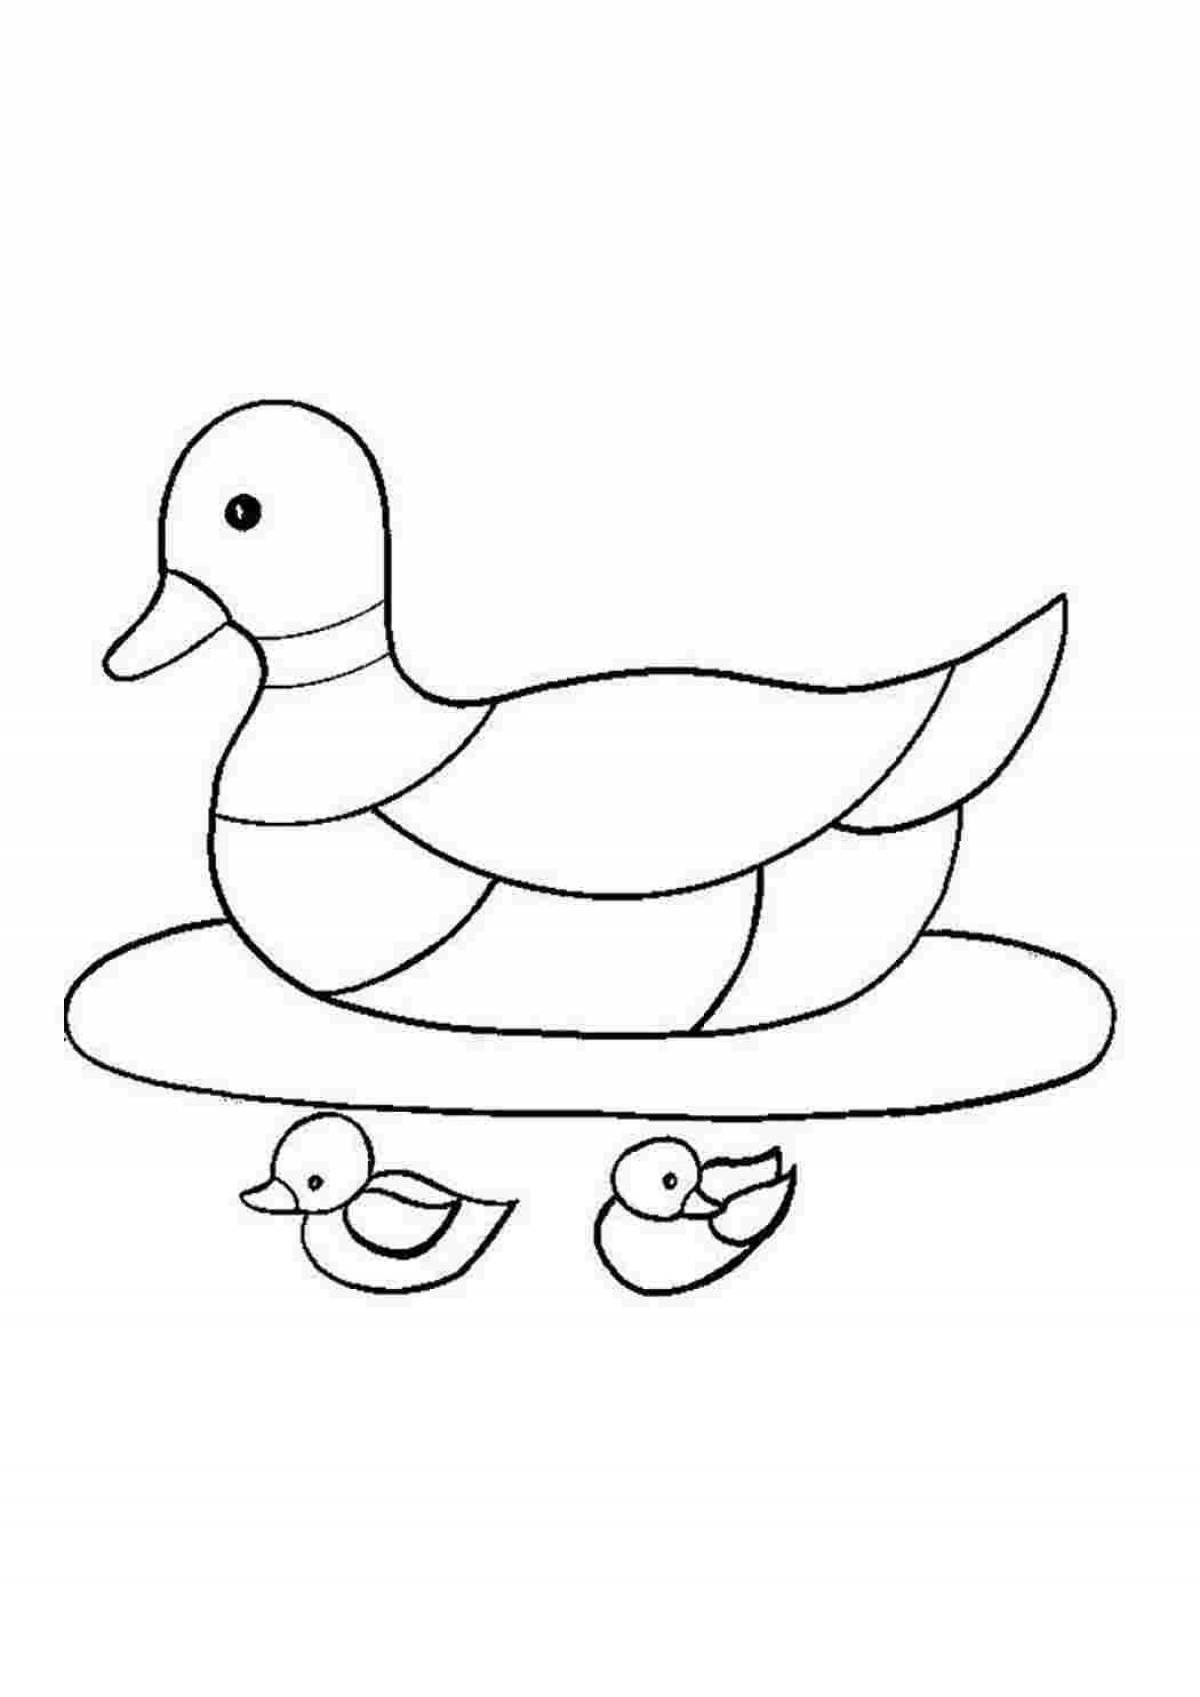 Lalafana duck funny coloring book